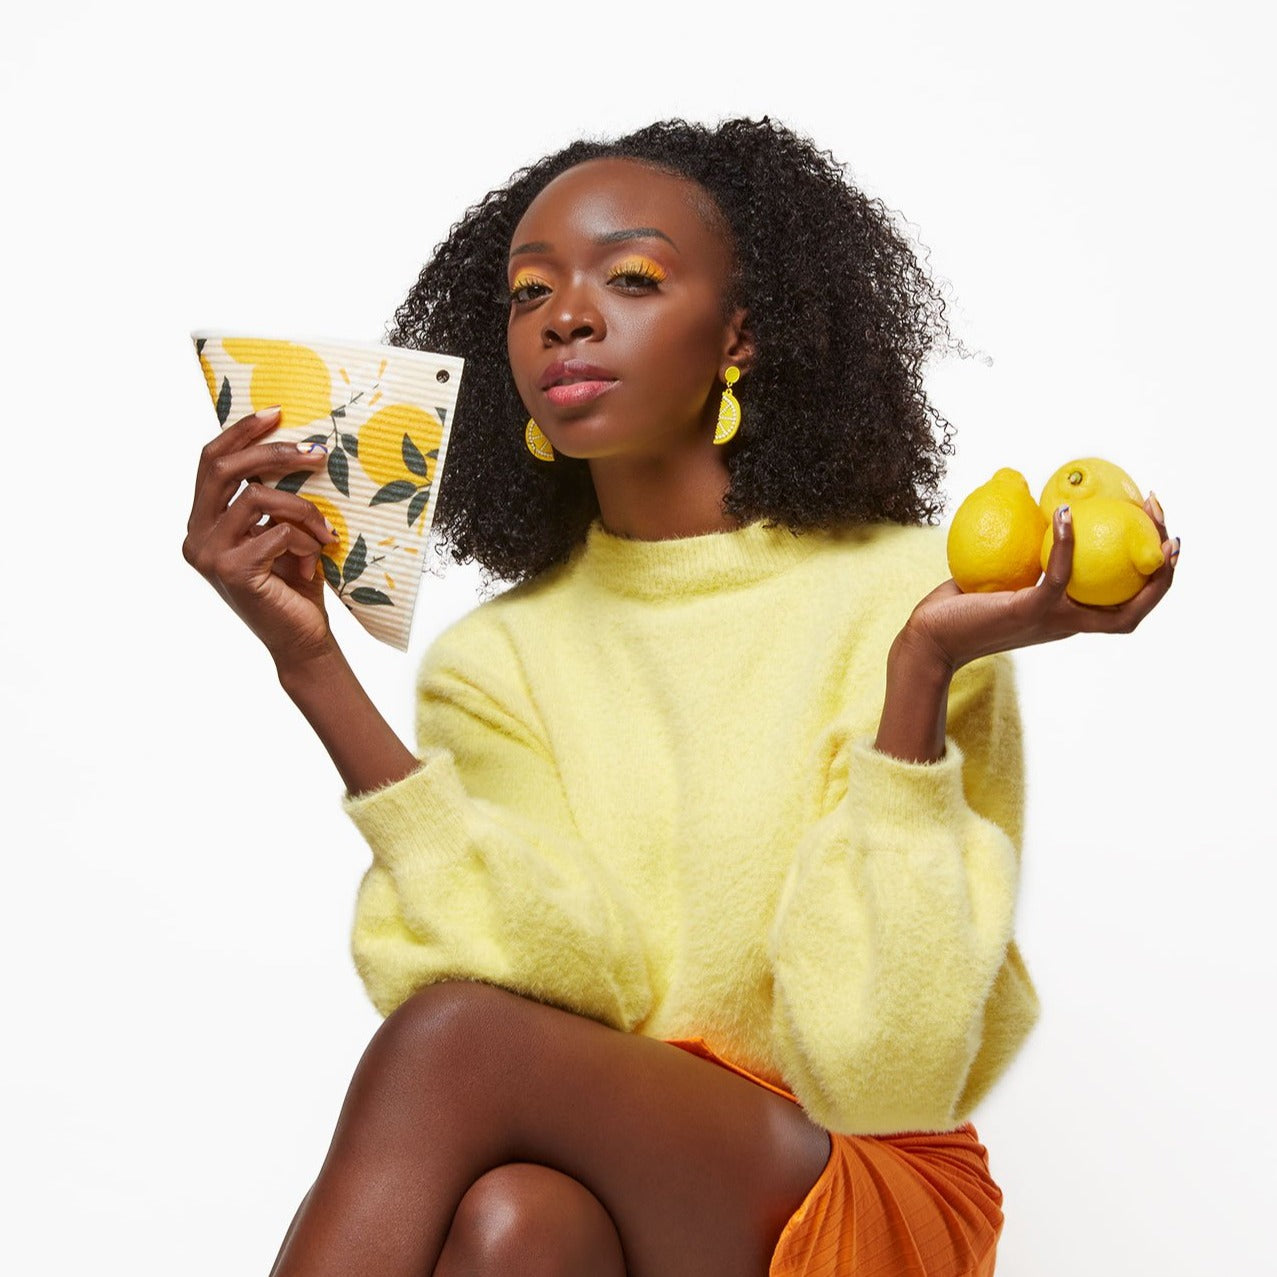 Model holding reusable paper towel with lemon design in one hand and three lemons in the other